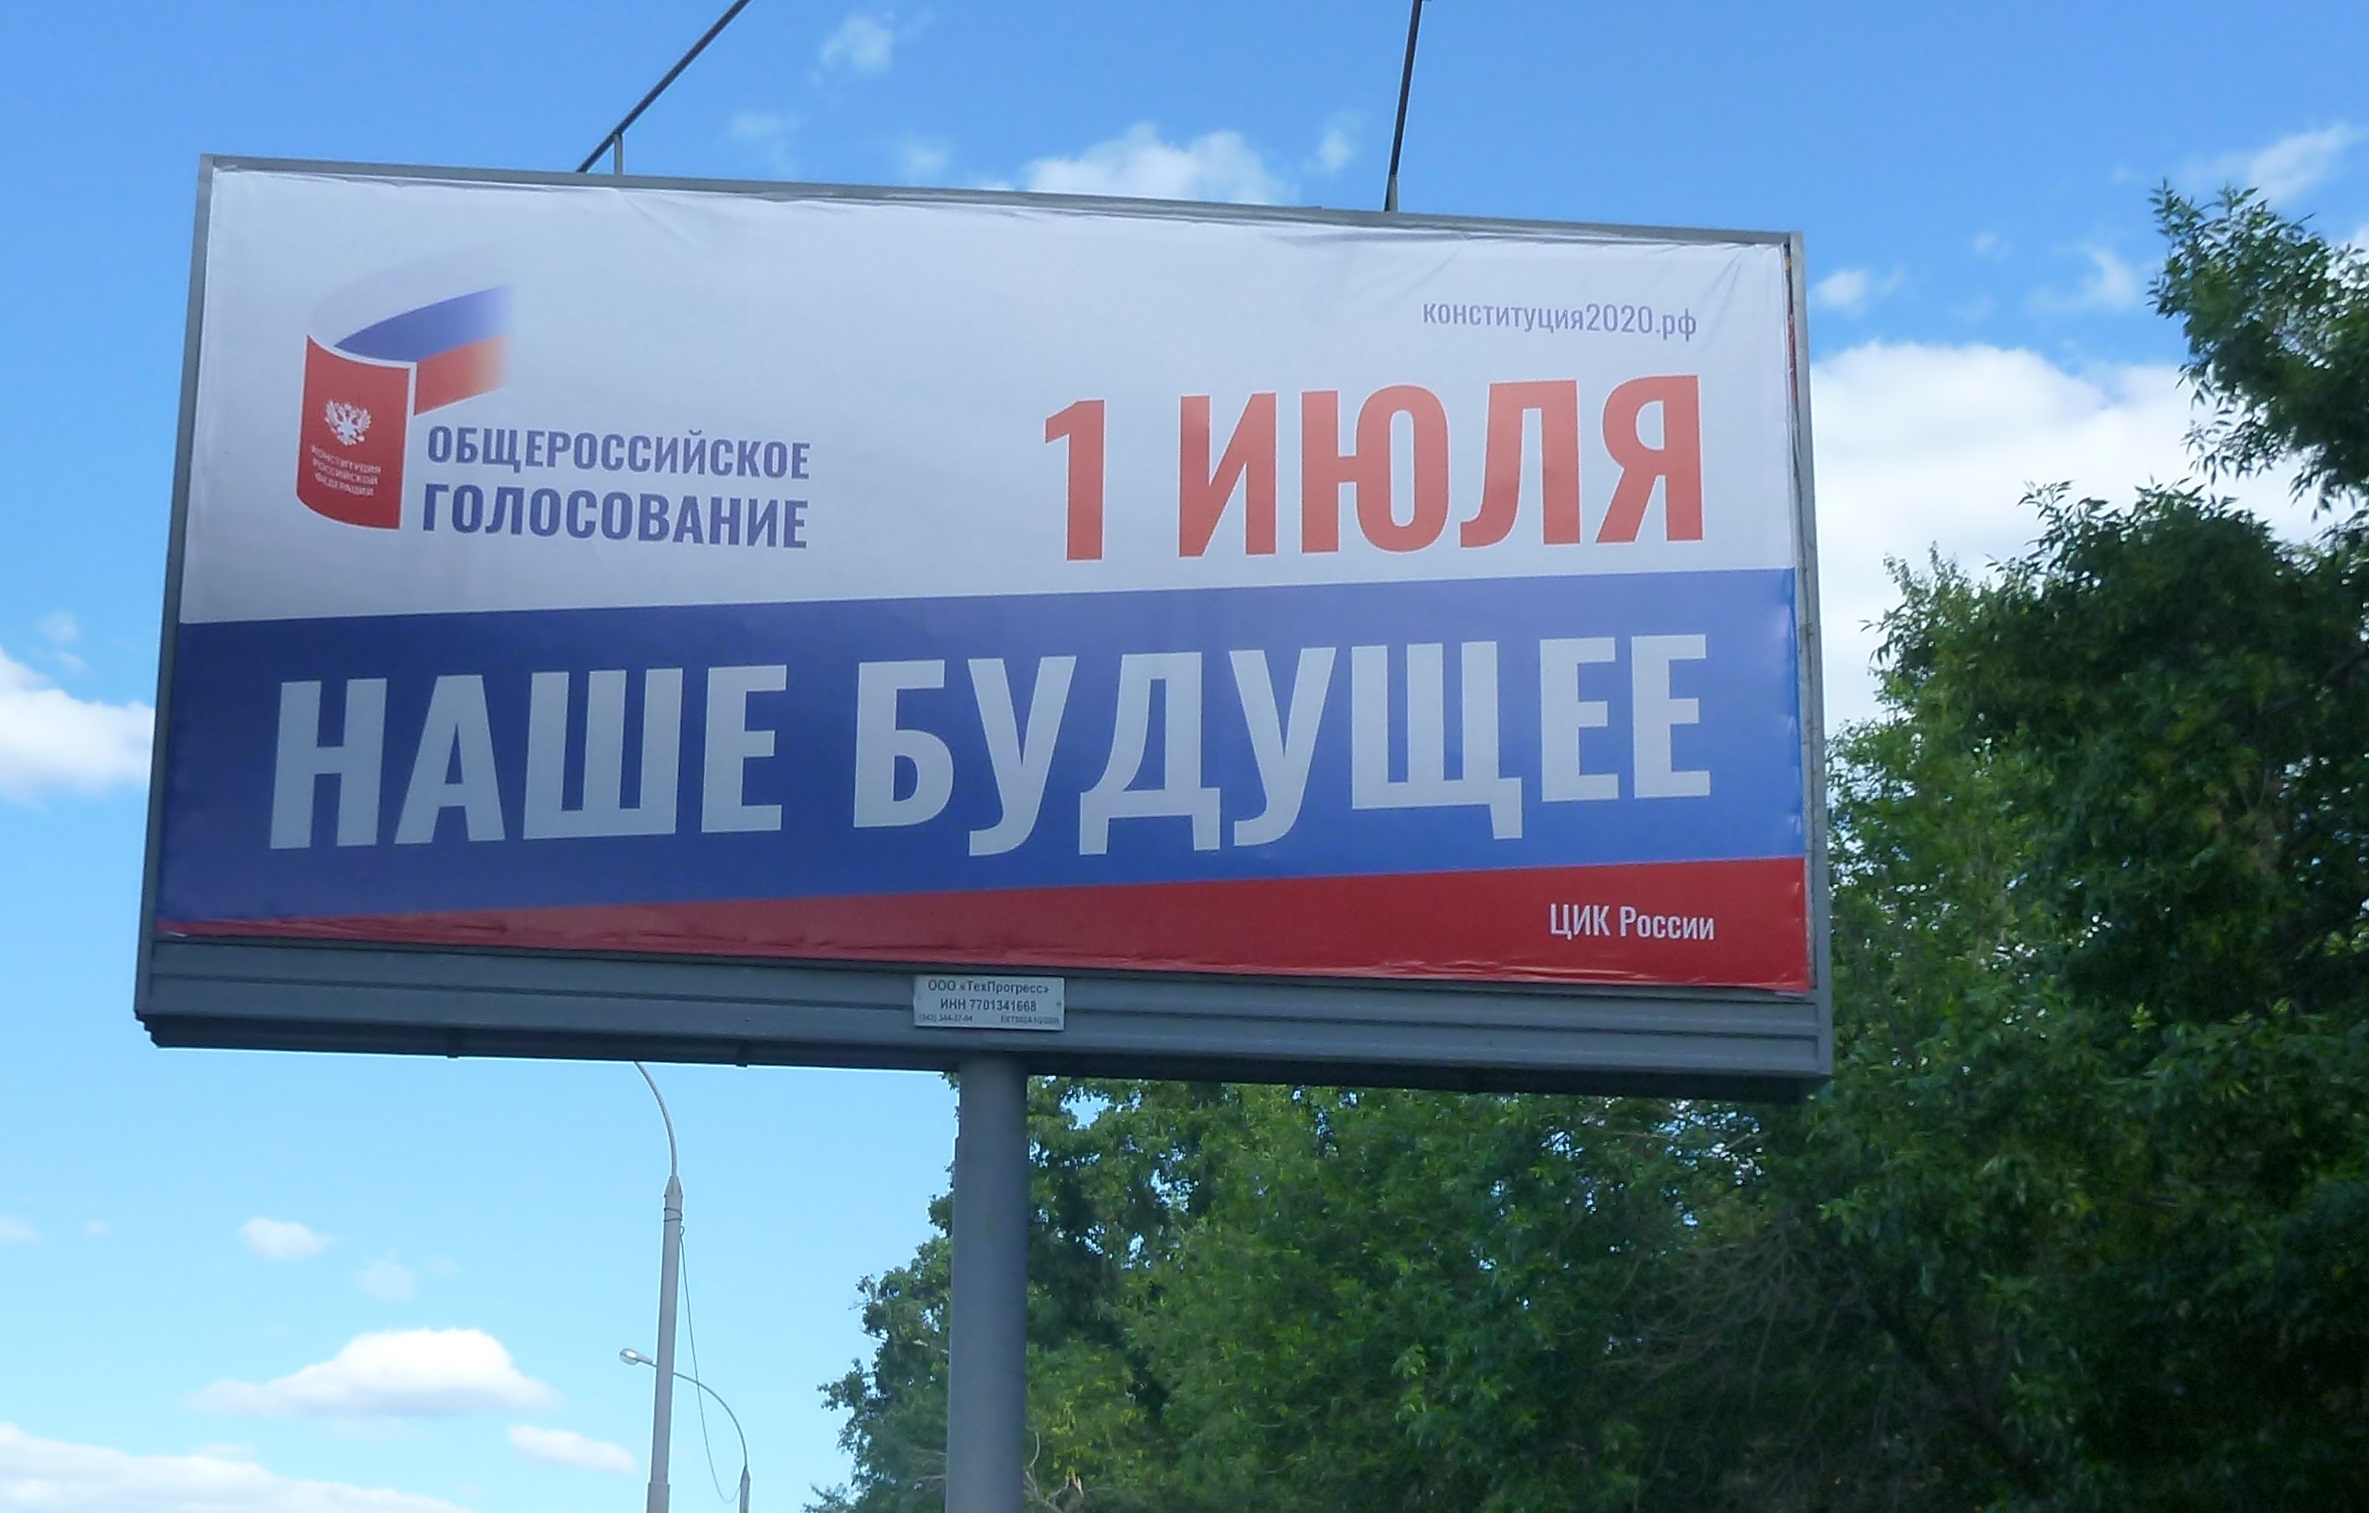 A billboard by the Russian Election Committee promoting the July 1, 2020 nationwide referendum on the constitutional amendments removing legal restrictions for Vladimir Putin to maintain his power over the country through 2036. It says: "July 1 - Our Future." (Photo: wikipedia.org)